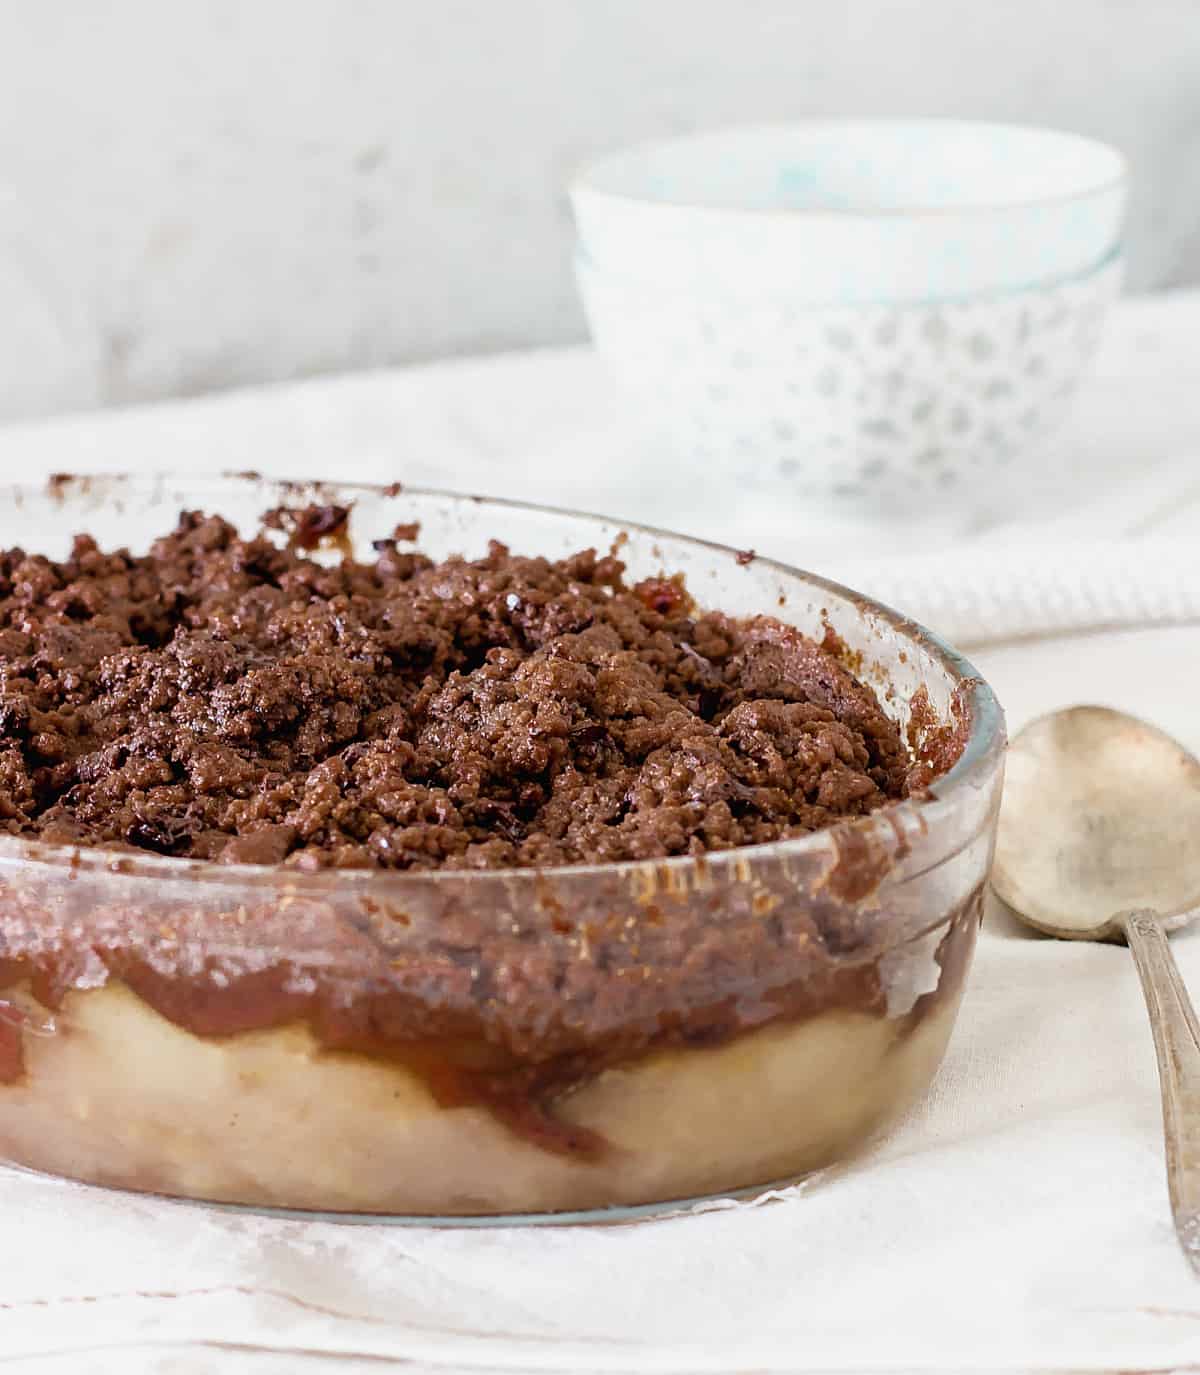 A glass oval dish with baked chocolate apple crisp, grey background, a silver spoon